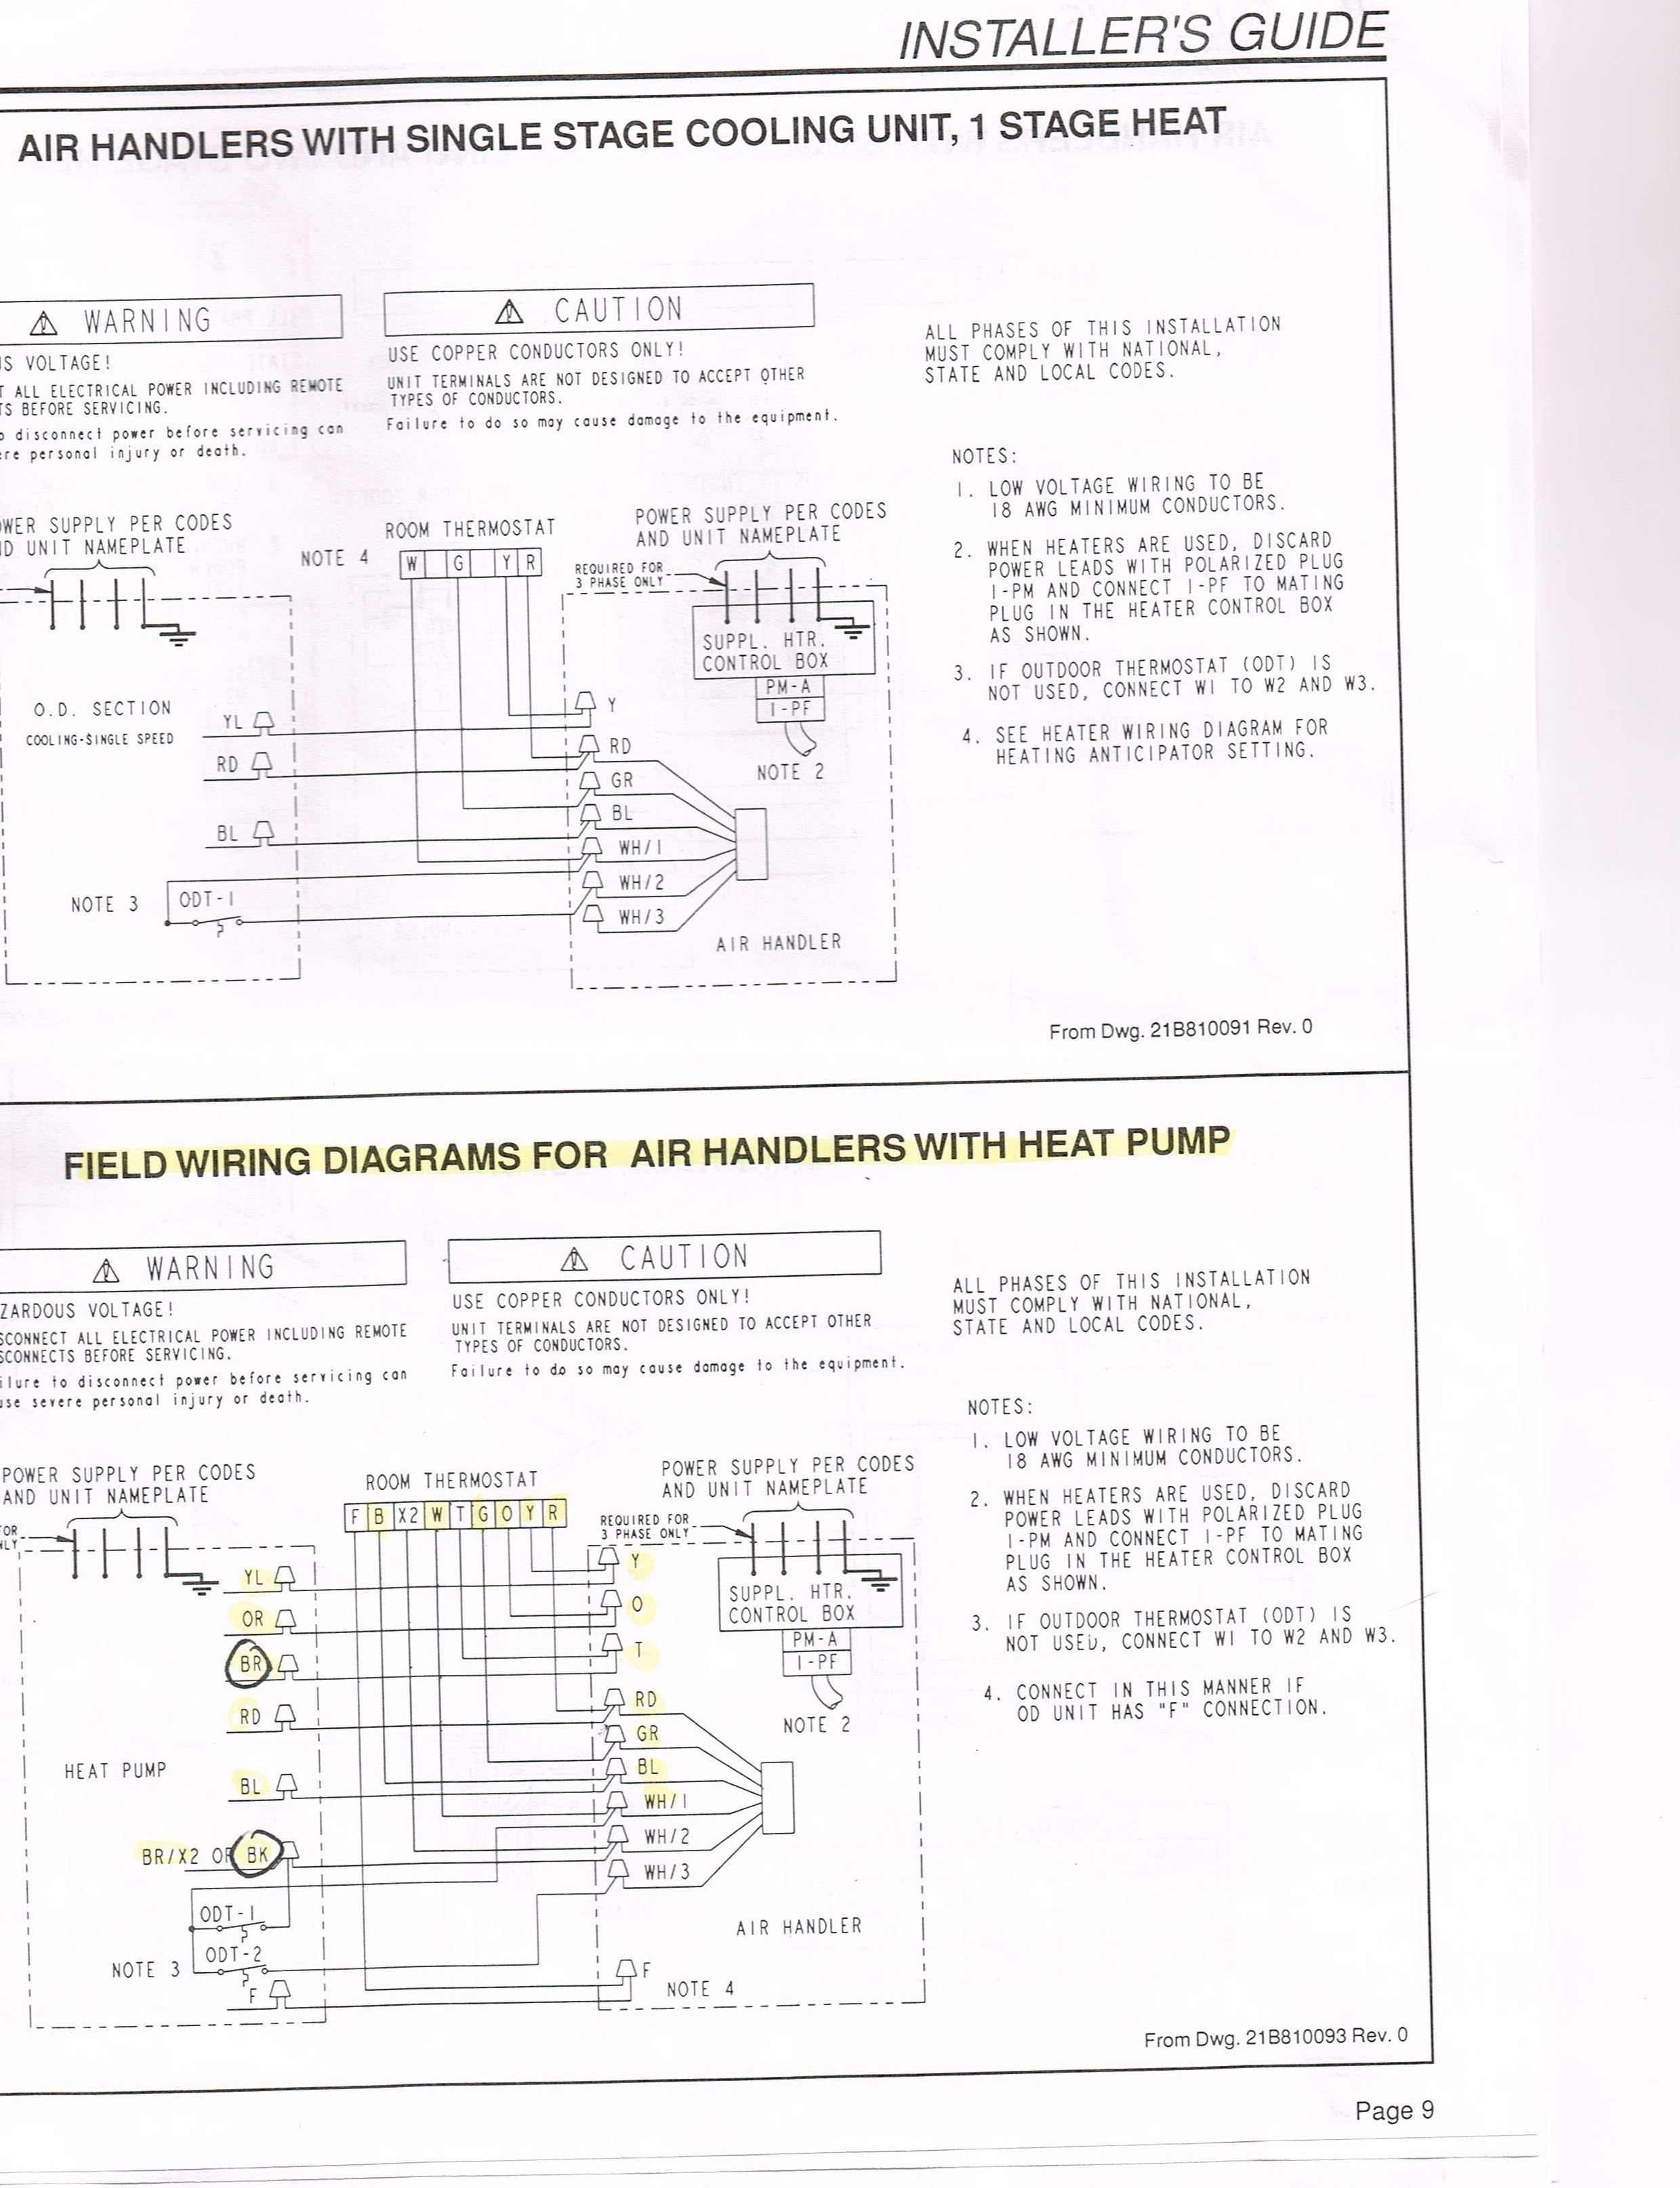 Multiple Gfci Wiring Diagram New Gfci Outlet Wiring Diagram Lovely How to Install Multiple Gfci